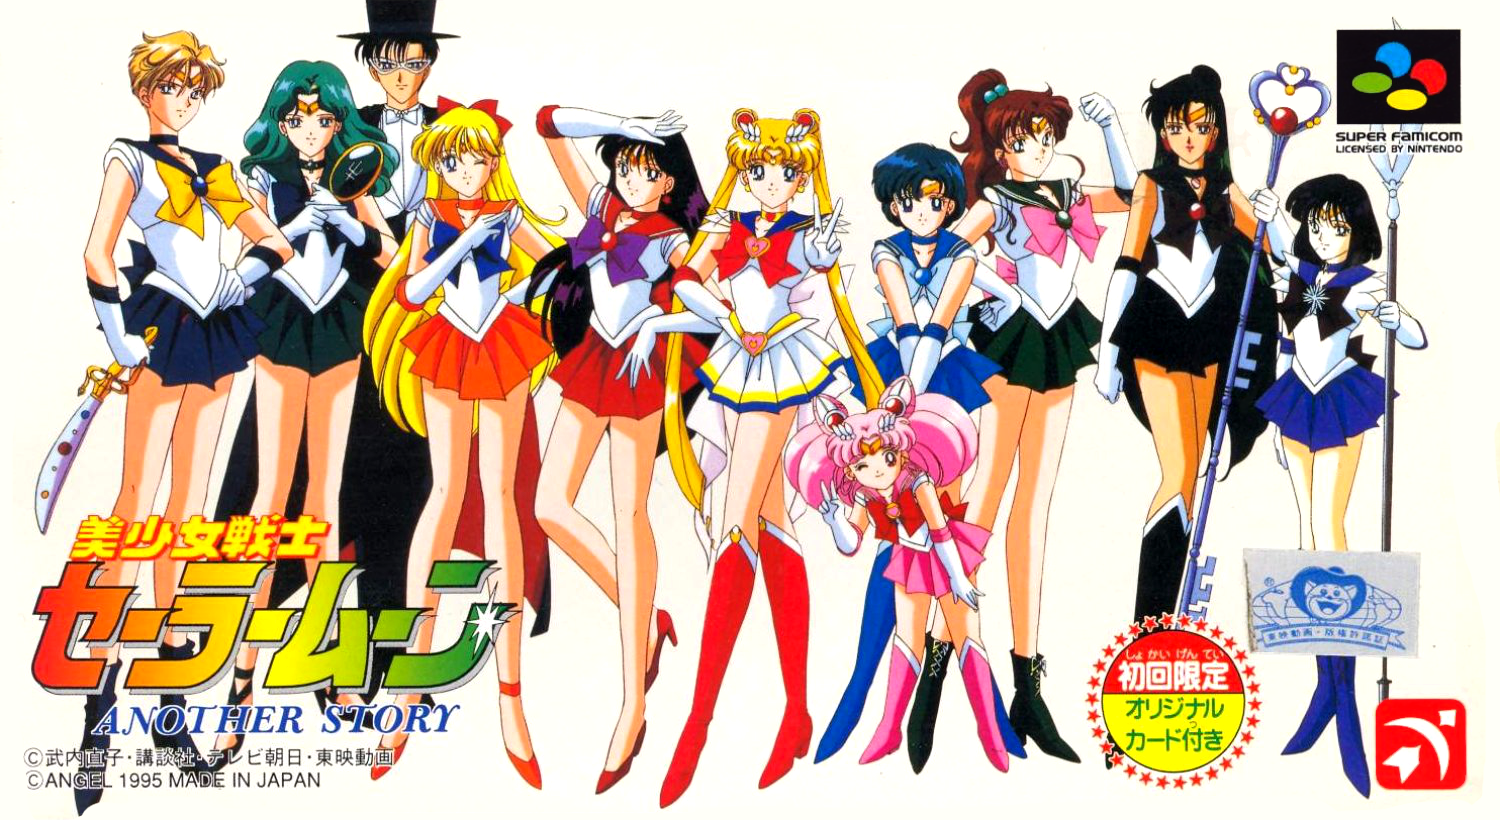 Sailor moon another story 2 download